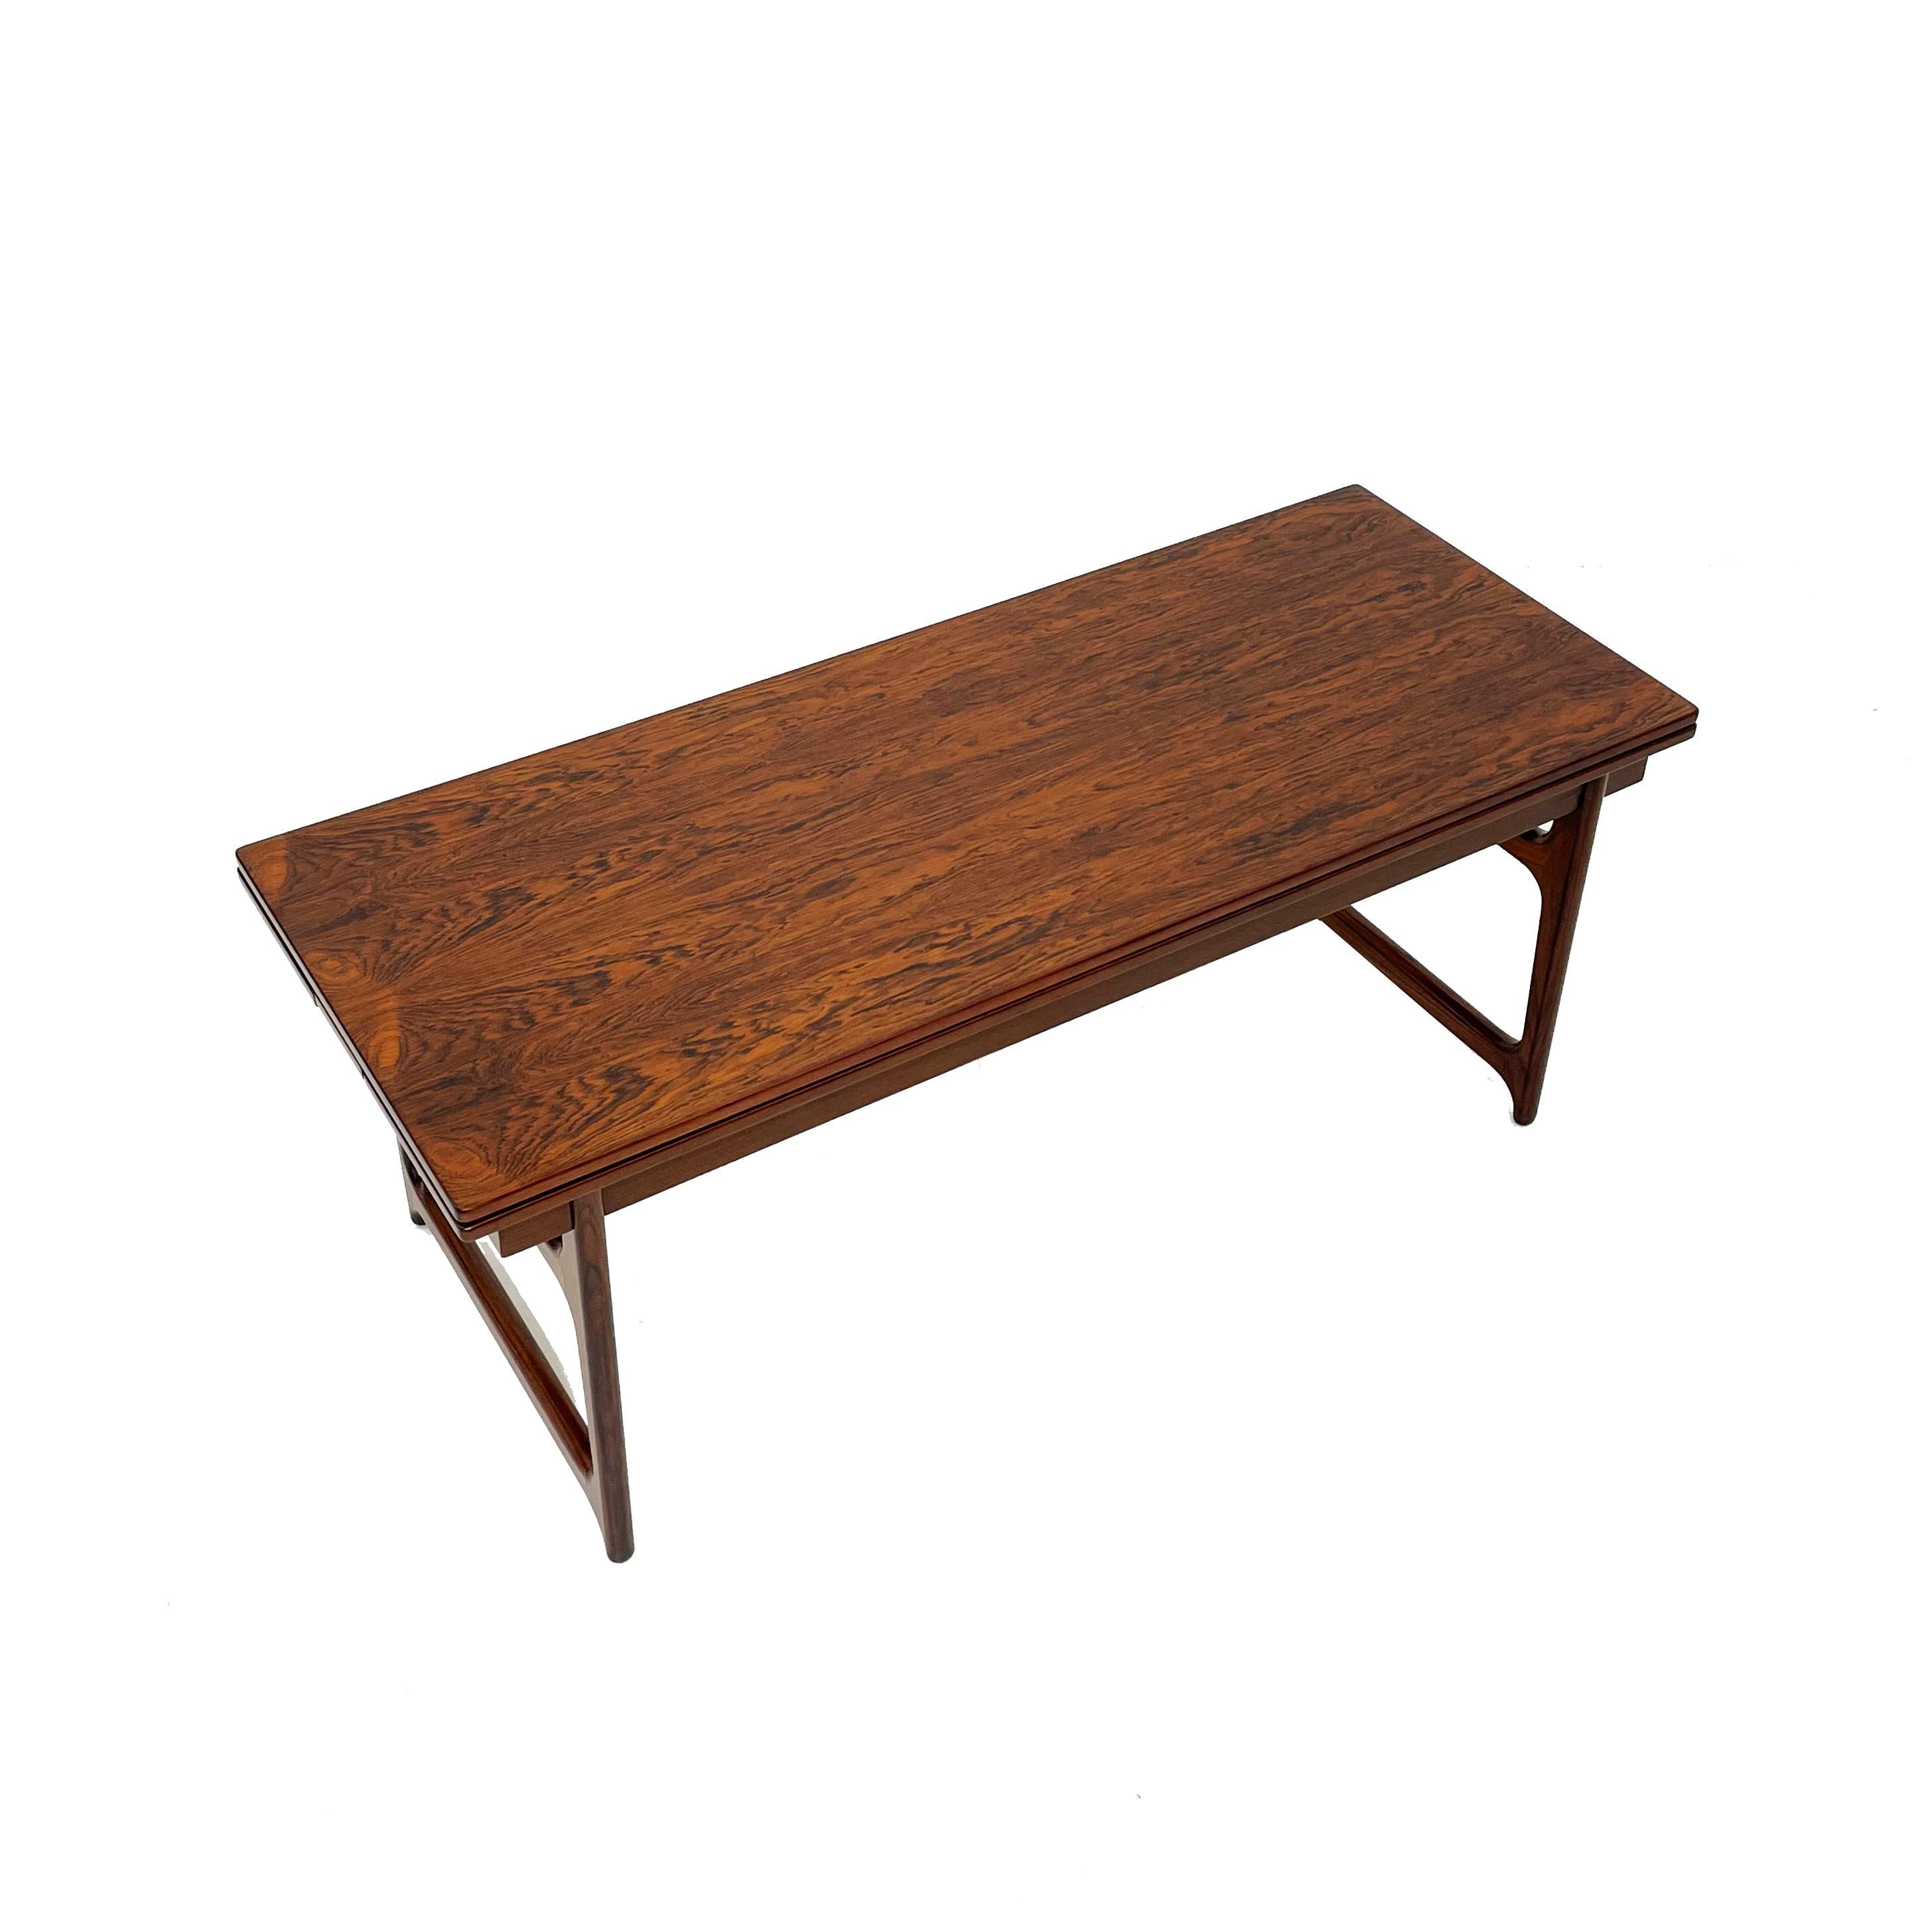 Extendable rosewood coffee table
Denmark, 1960s
Made of rosewood and rosewood veneer
Dimensions: 52 cm hight x 52 cm depth x 130 cm width. Extended 92 cm depth

The table is in mint condition. It was professionally renovated and refinished with a